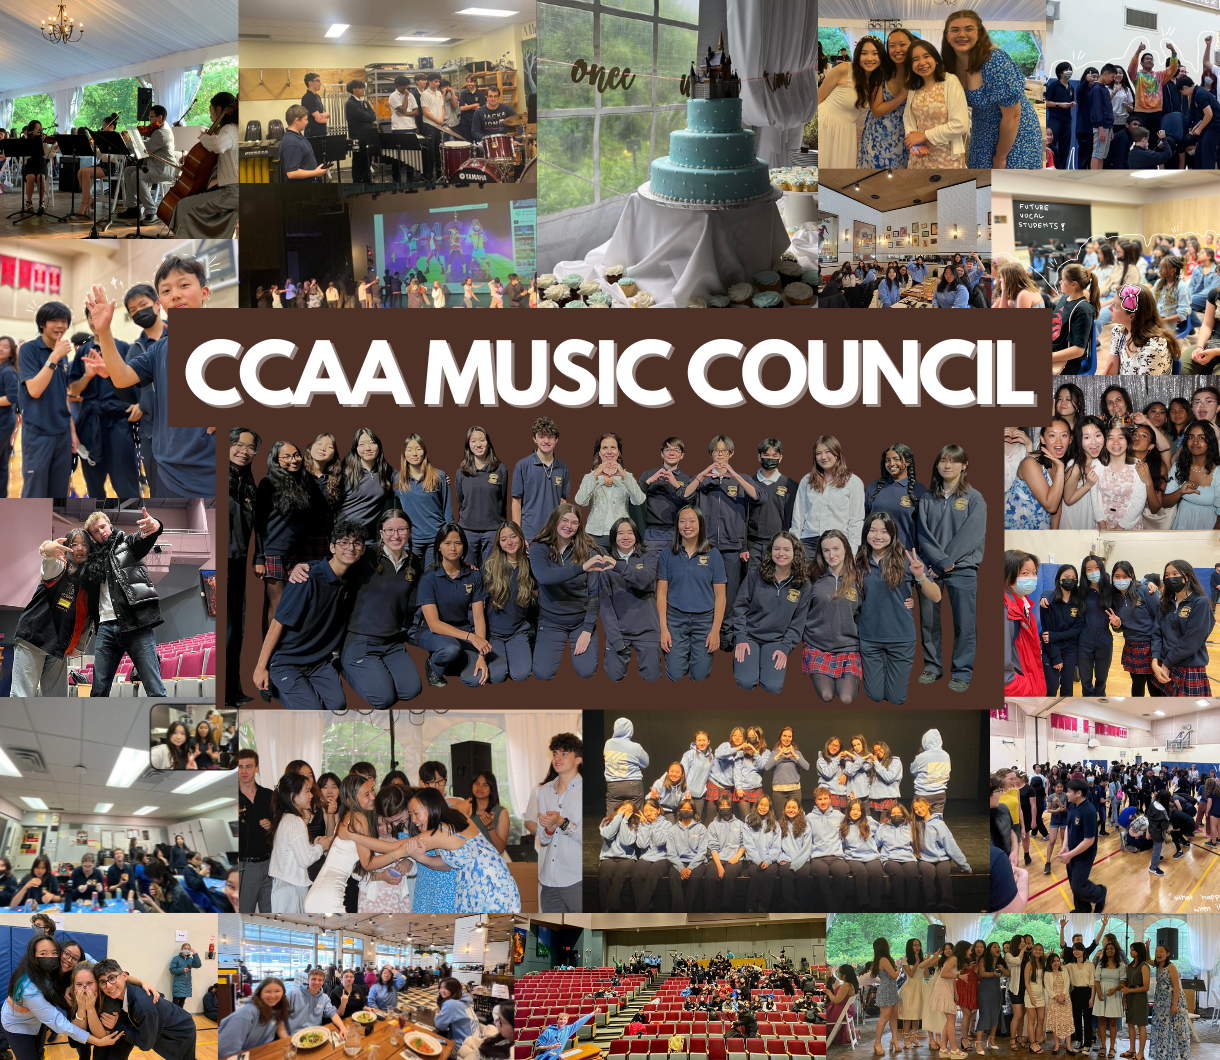 Photo collage showing multiple images showcasing Cardinal Carter students in school with "CCAA Music Council" written in the middle.